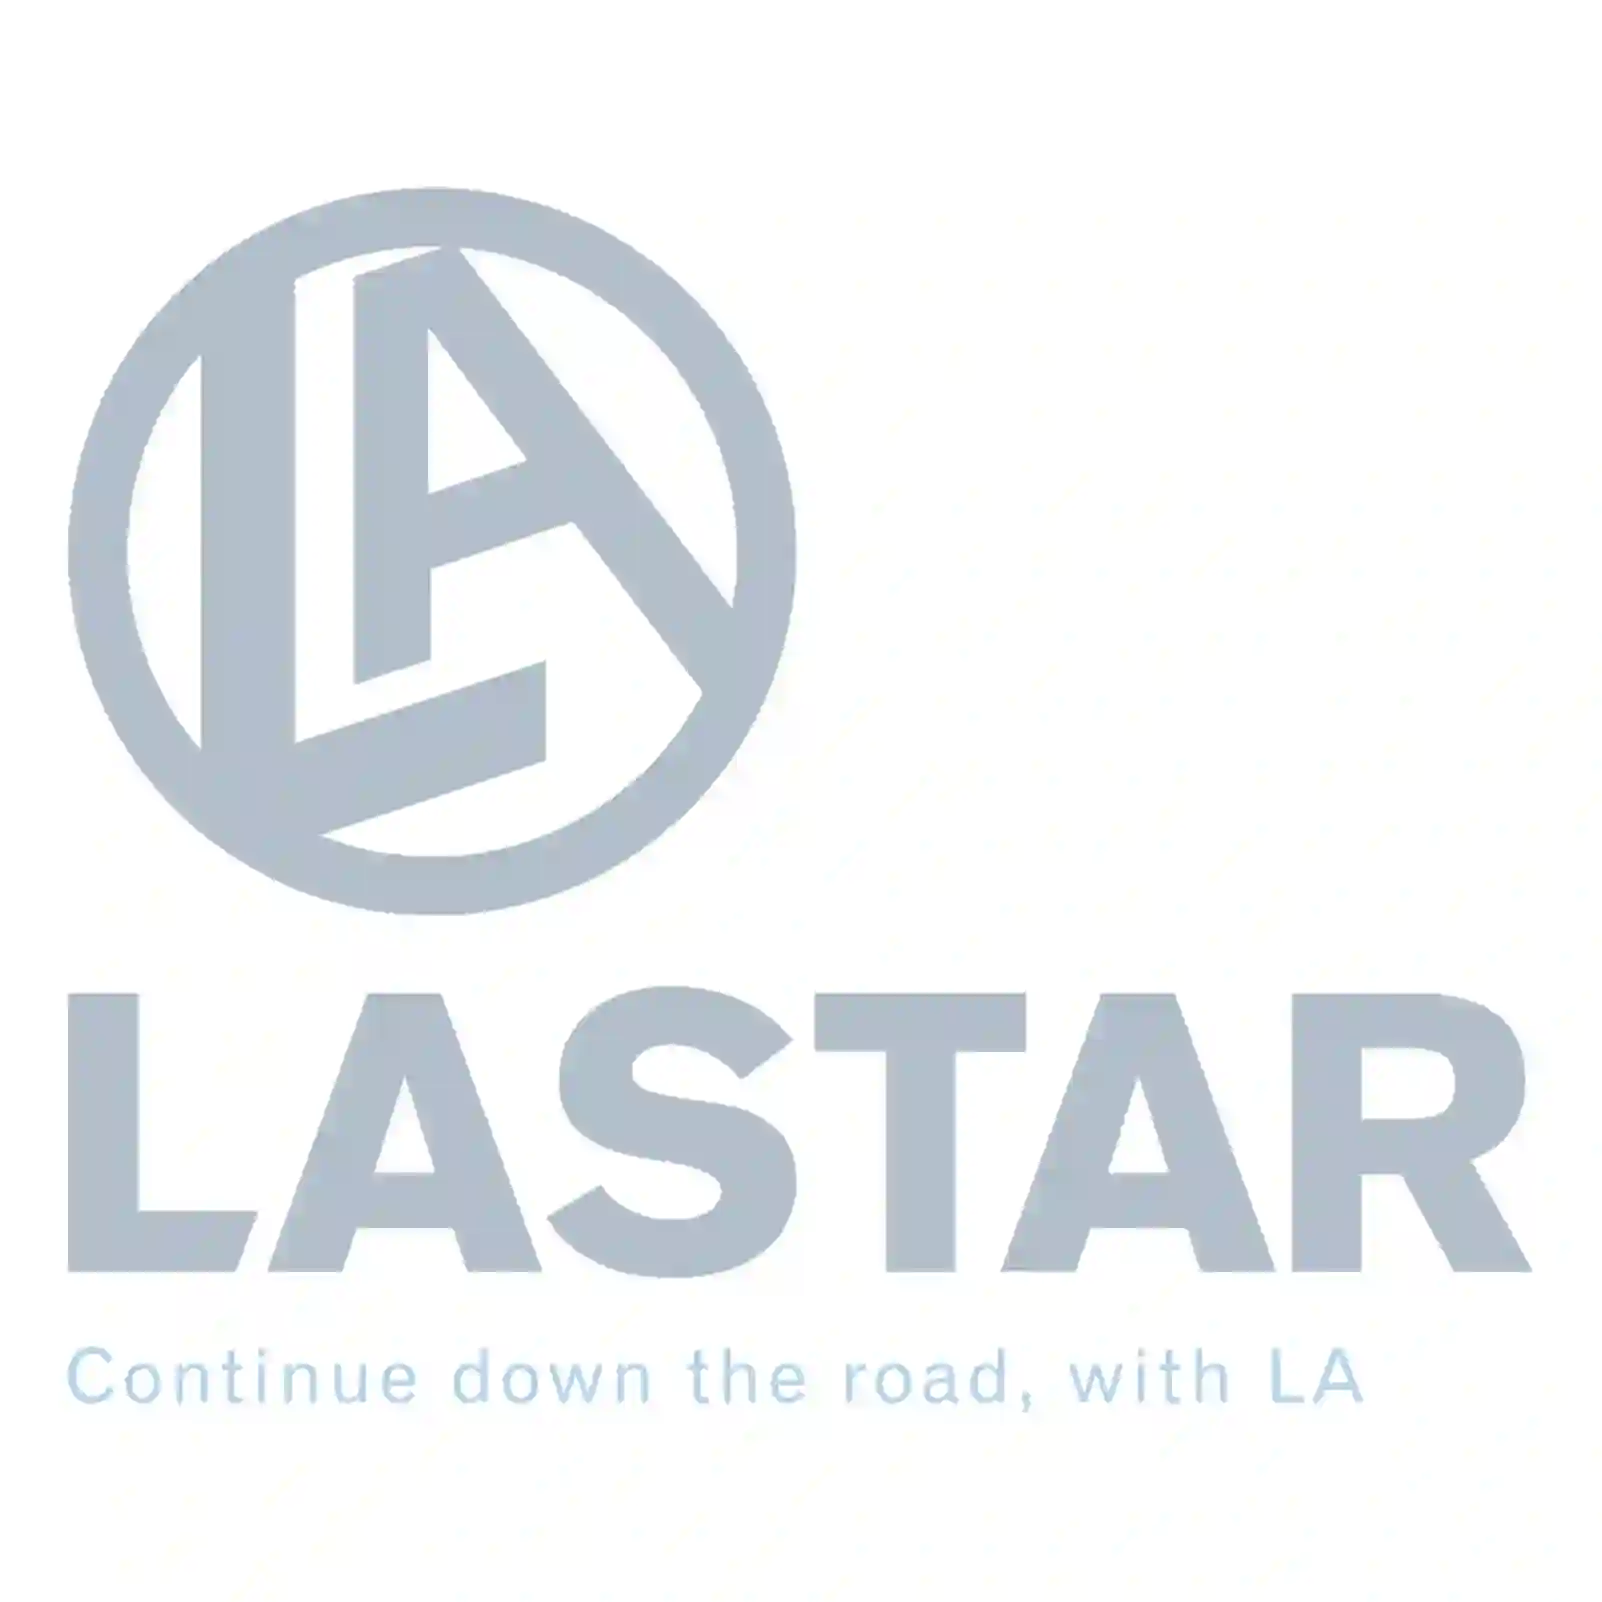  Cover, front grill, center || Lastar Spare Part | Truck Spare Parts, Auotomotive Spare Parts